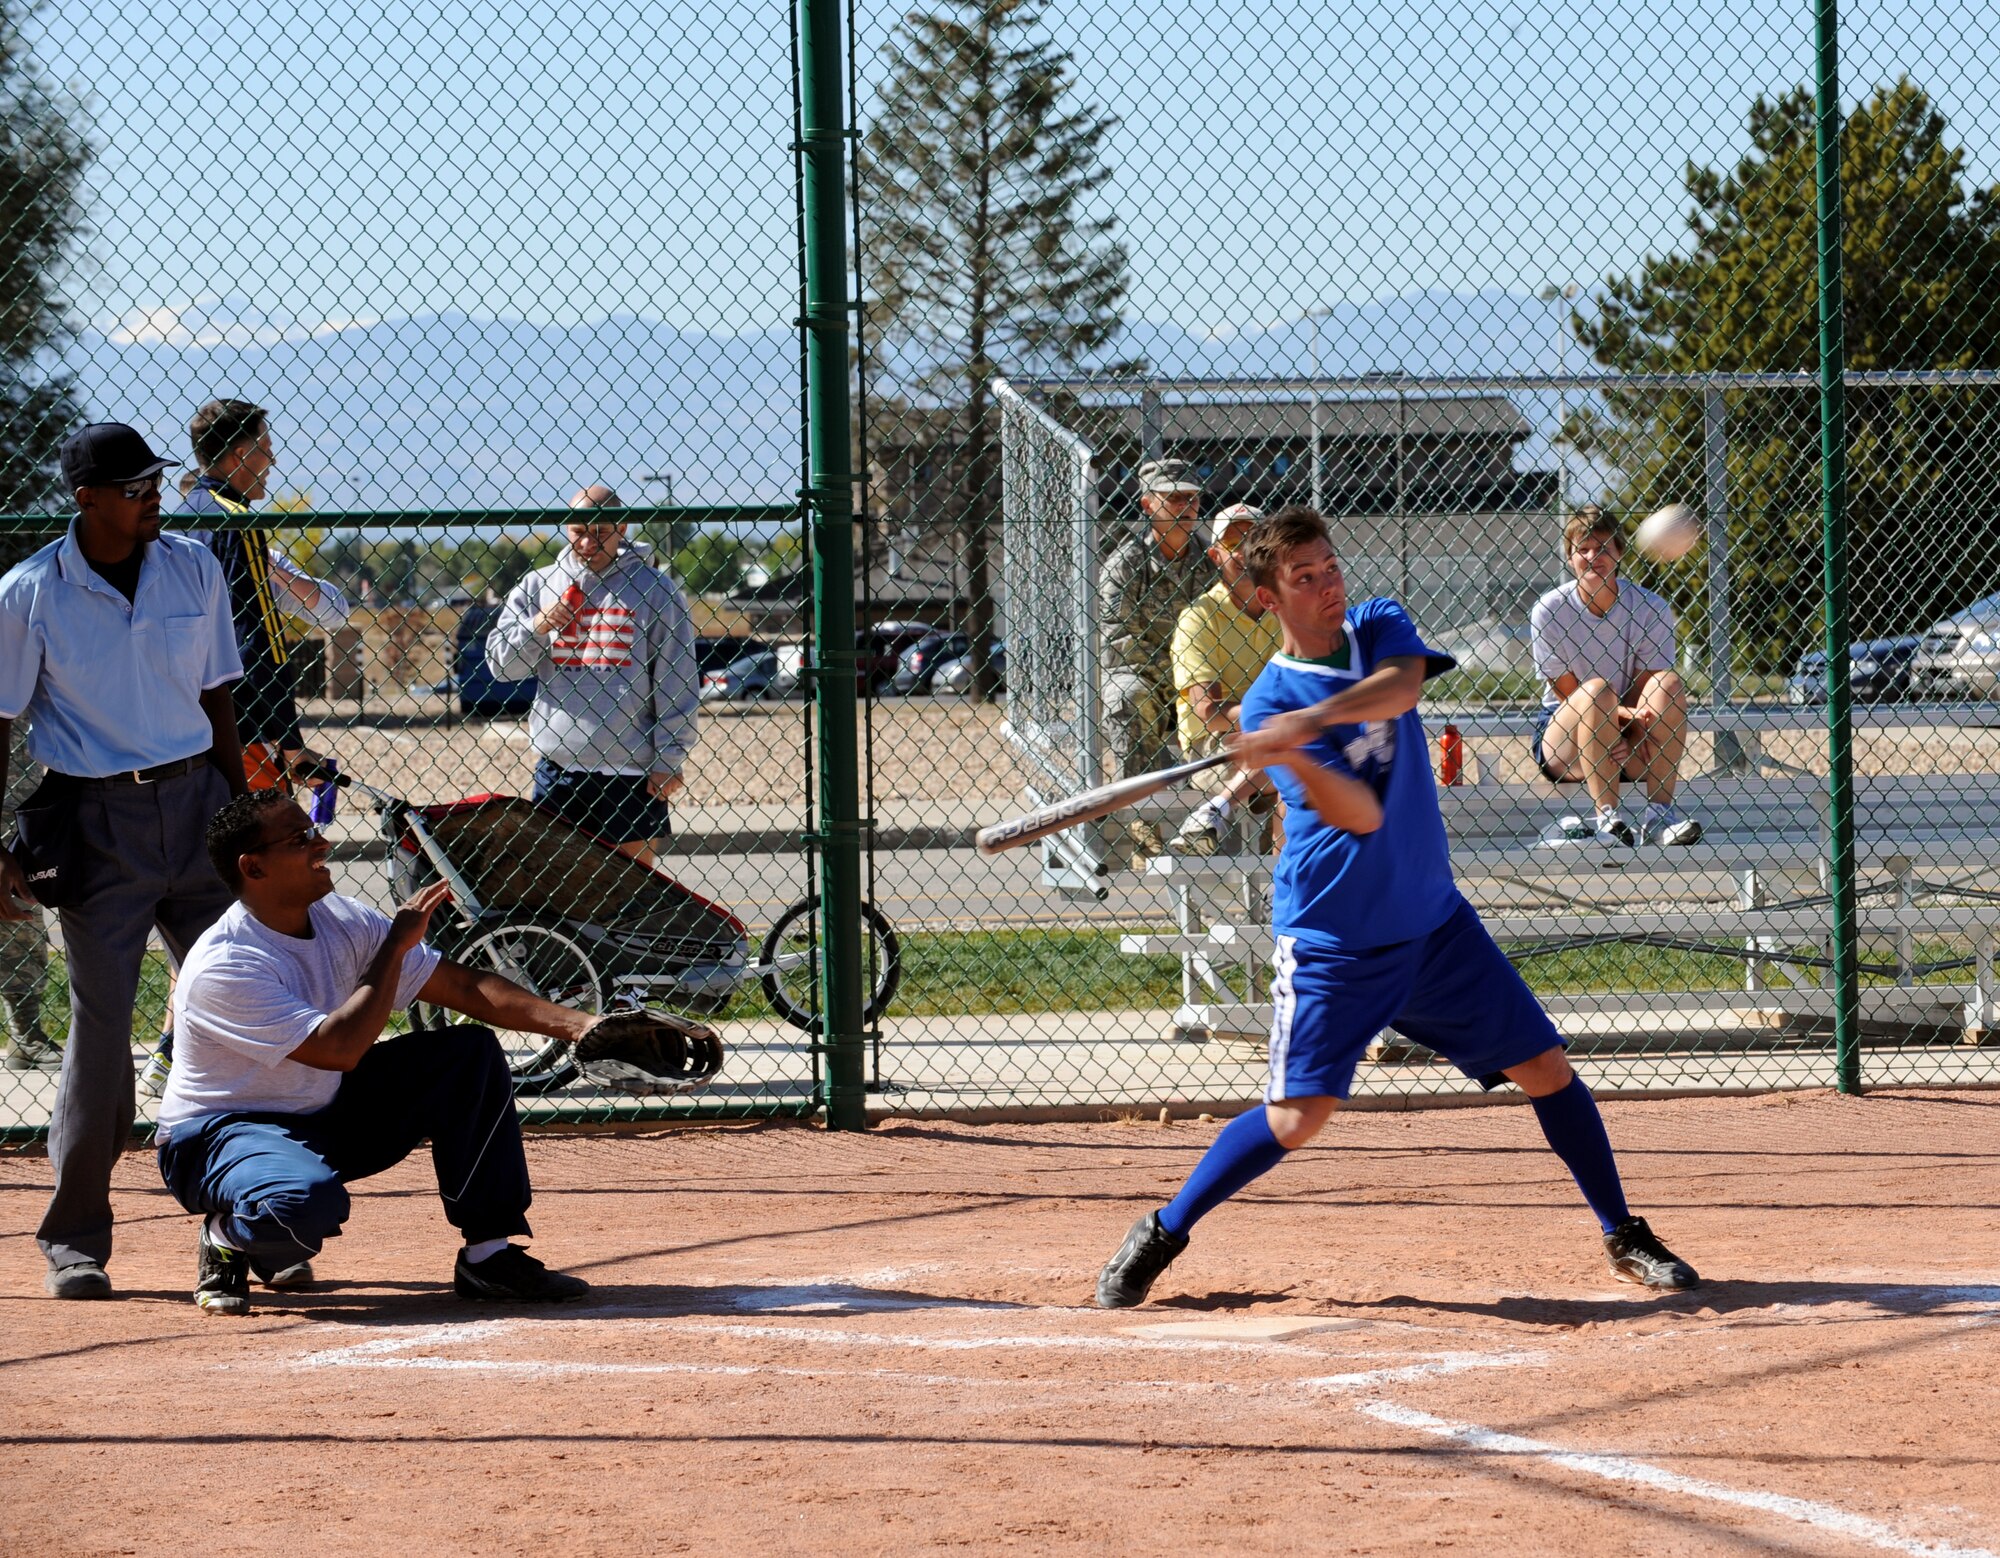 Buckley Air Force Base, Colo. – The 460th Buckley Panthers team bats against the Top 3/Commanders team in a softball game during Buckley’s Sports and Field Day Oct. 2. The Panthers beat the Top 3/Commanders team 13-8. (U. S. Air Force photo by Senior Airman John Easterling)